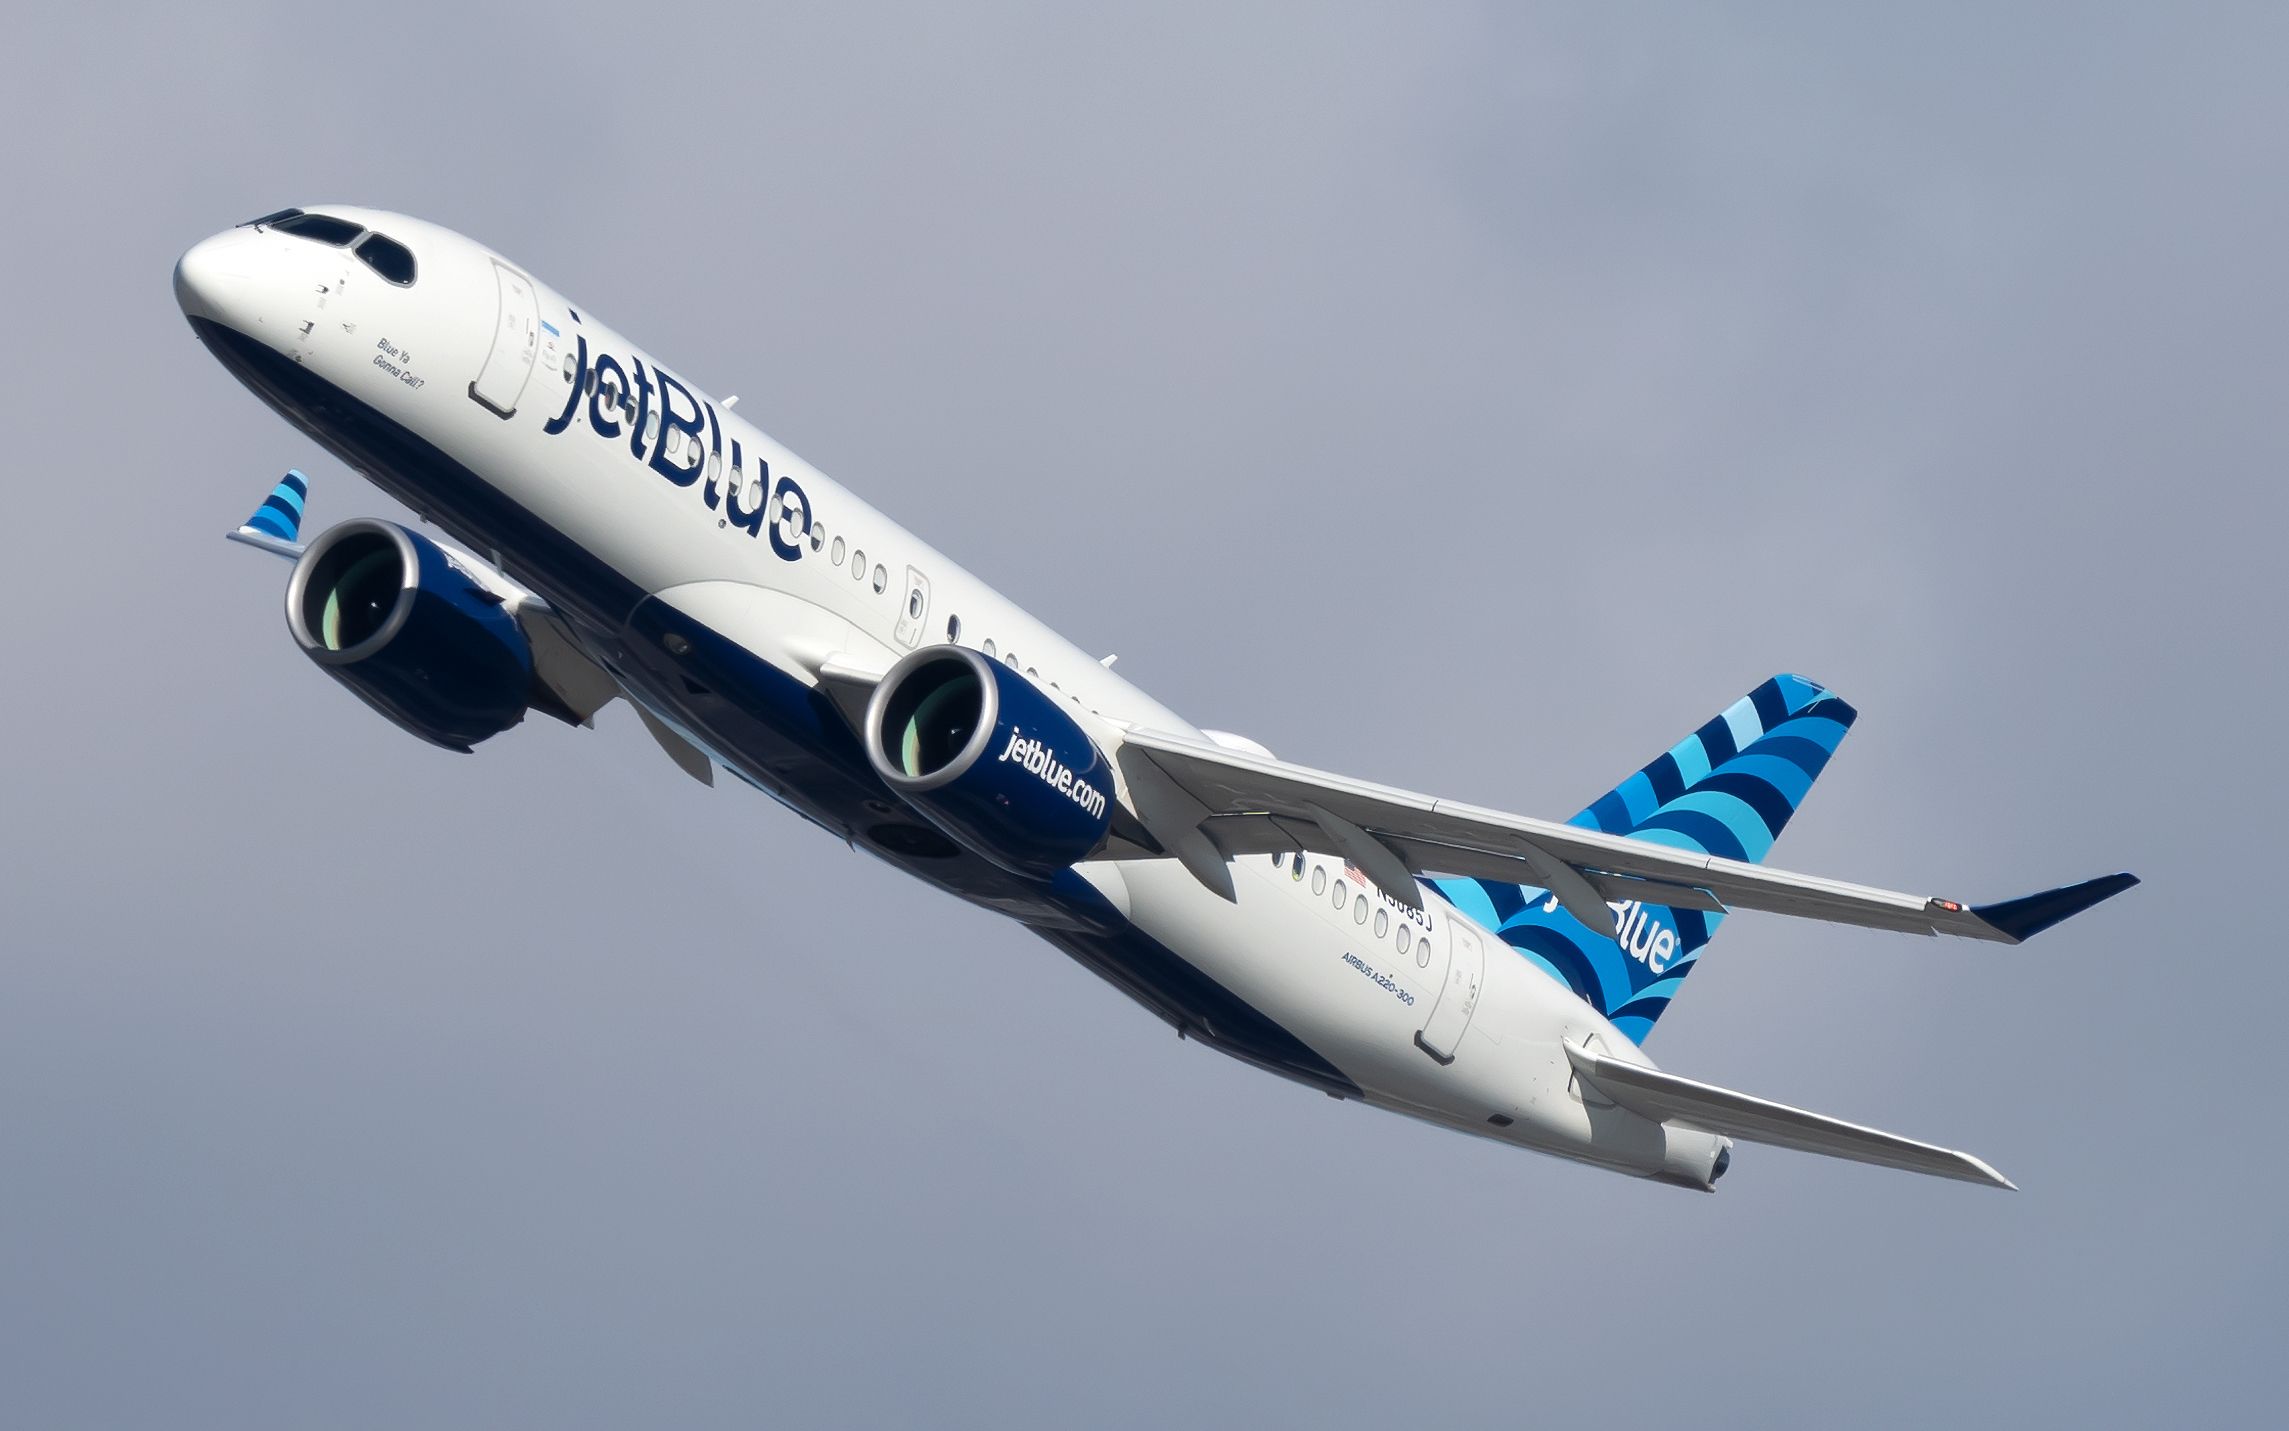 A JetBlue Airways Airbus A220-300 flying in the sky.